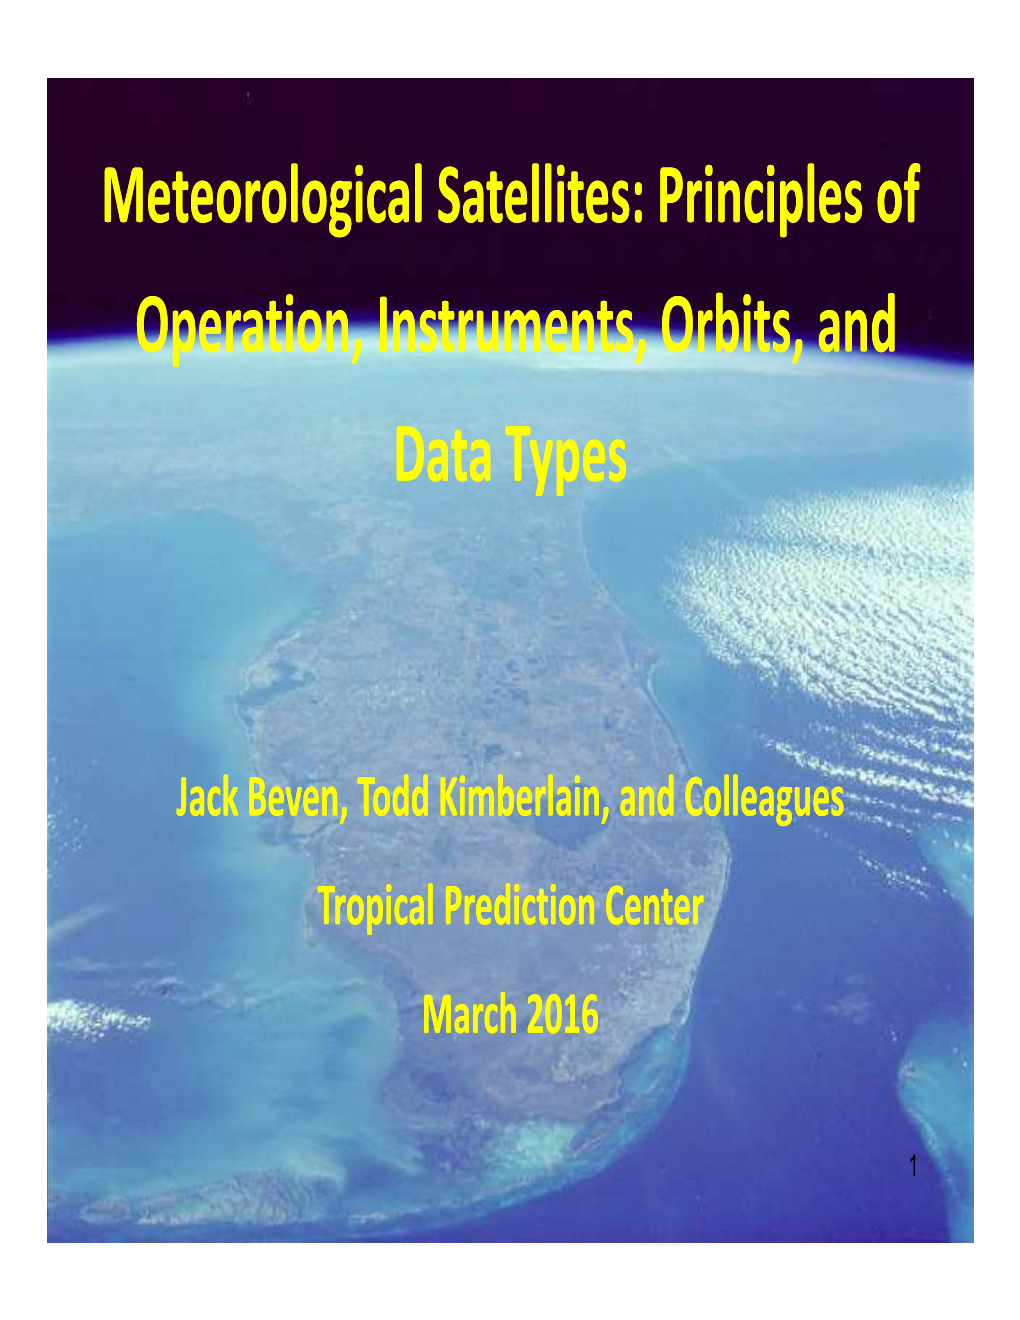 Principles of Operation, Instruments, Orbits, and Data Types Meteorological Satellites